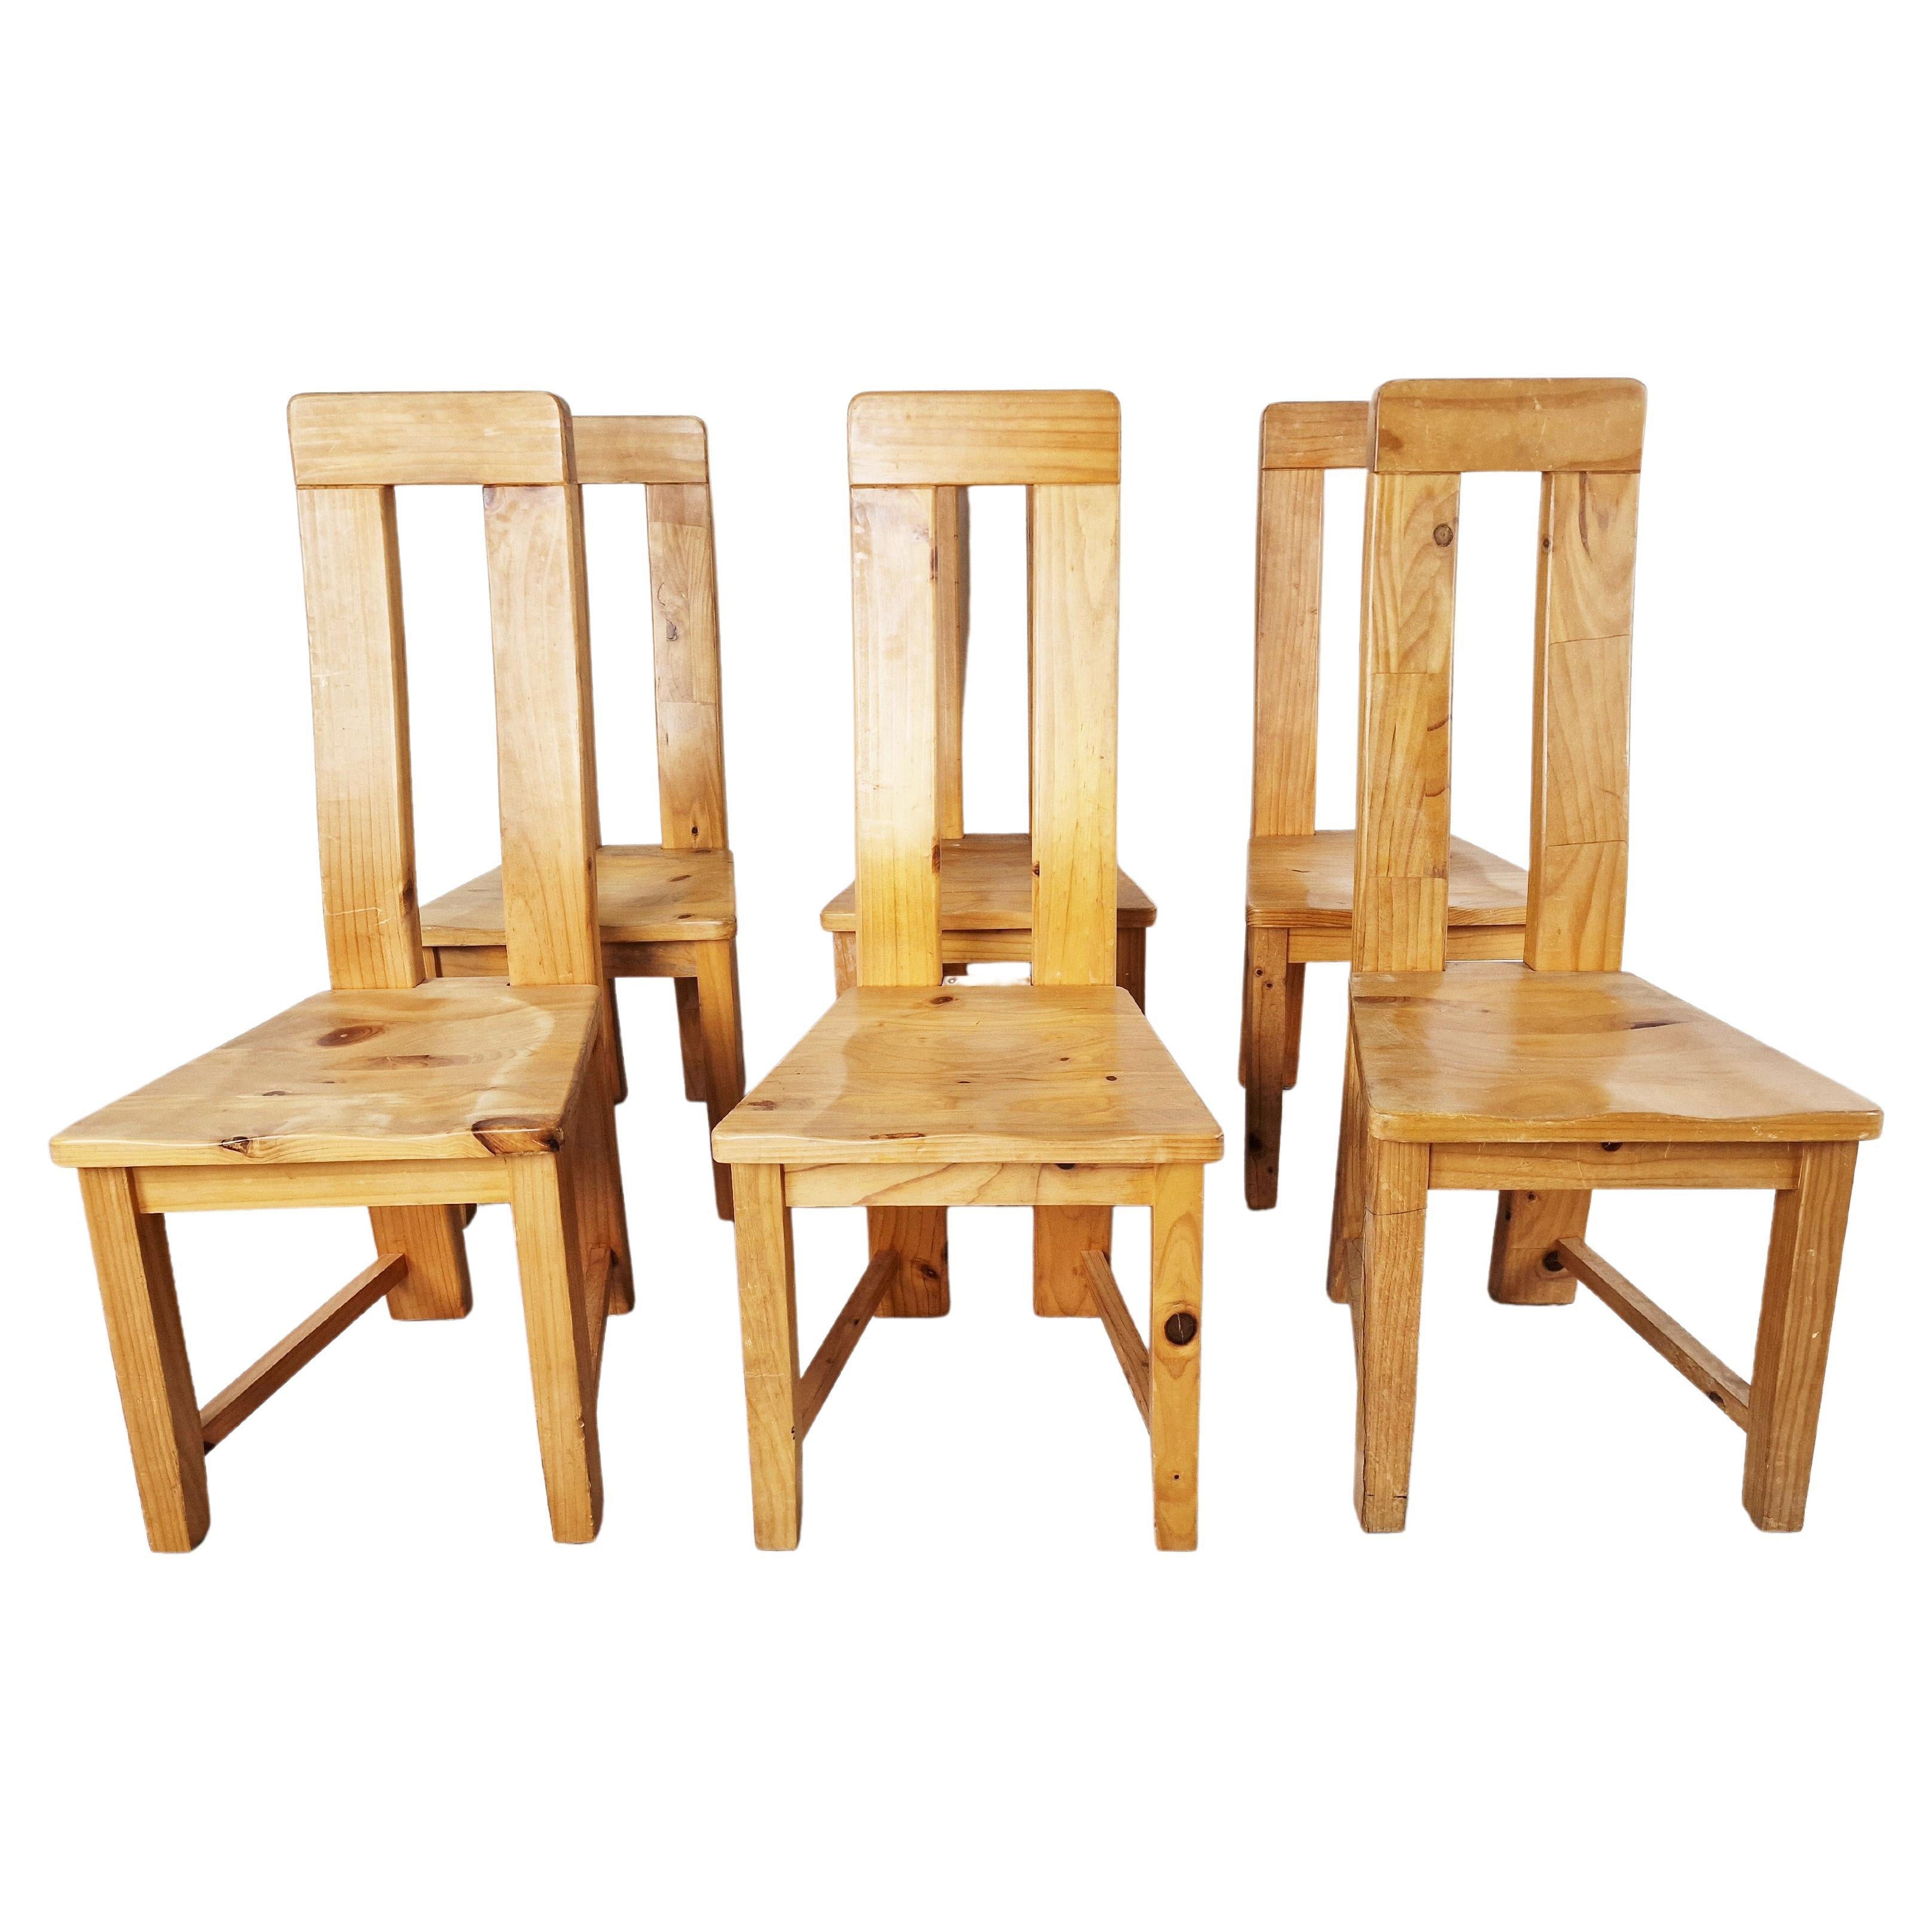 Set of 6 Highback Pine Wood Dining Chairs, 1970s For Sale